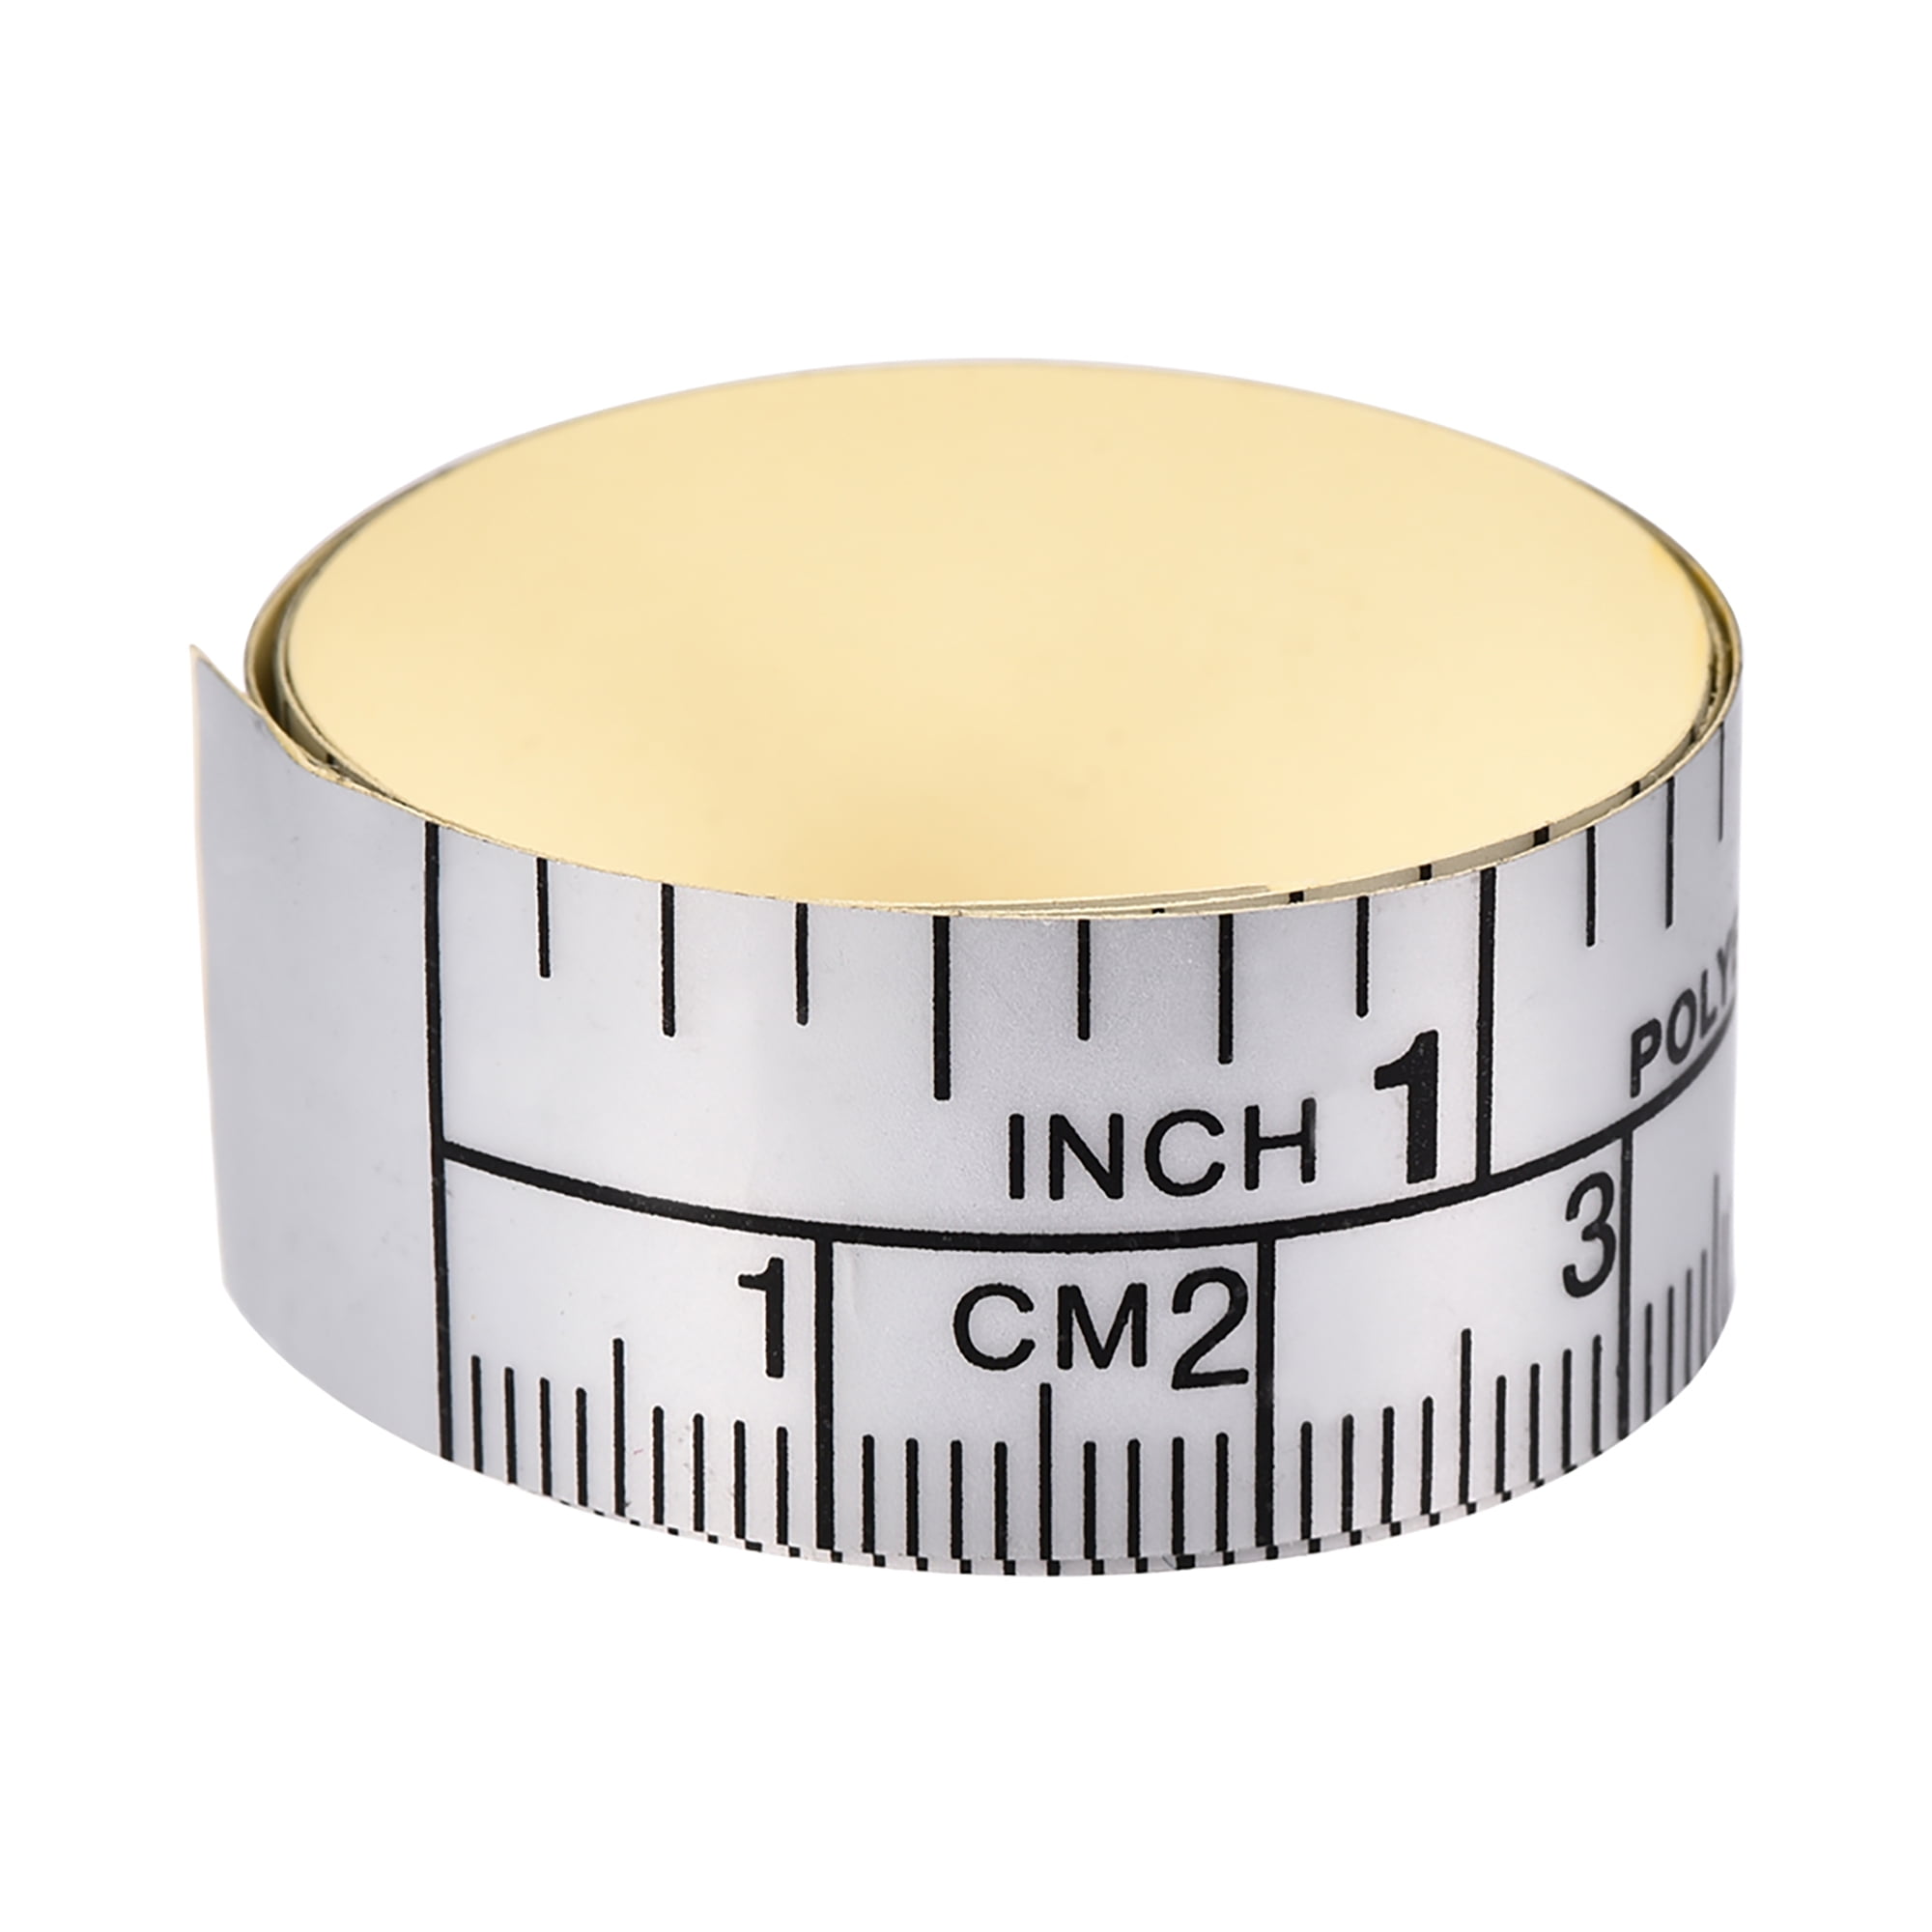 Adhesive Backed Tape Measure 24 Inches Inch Scale for Workbench